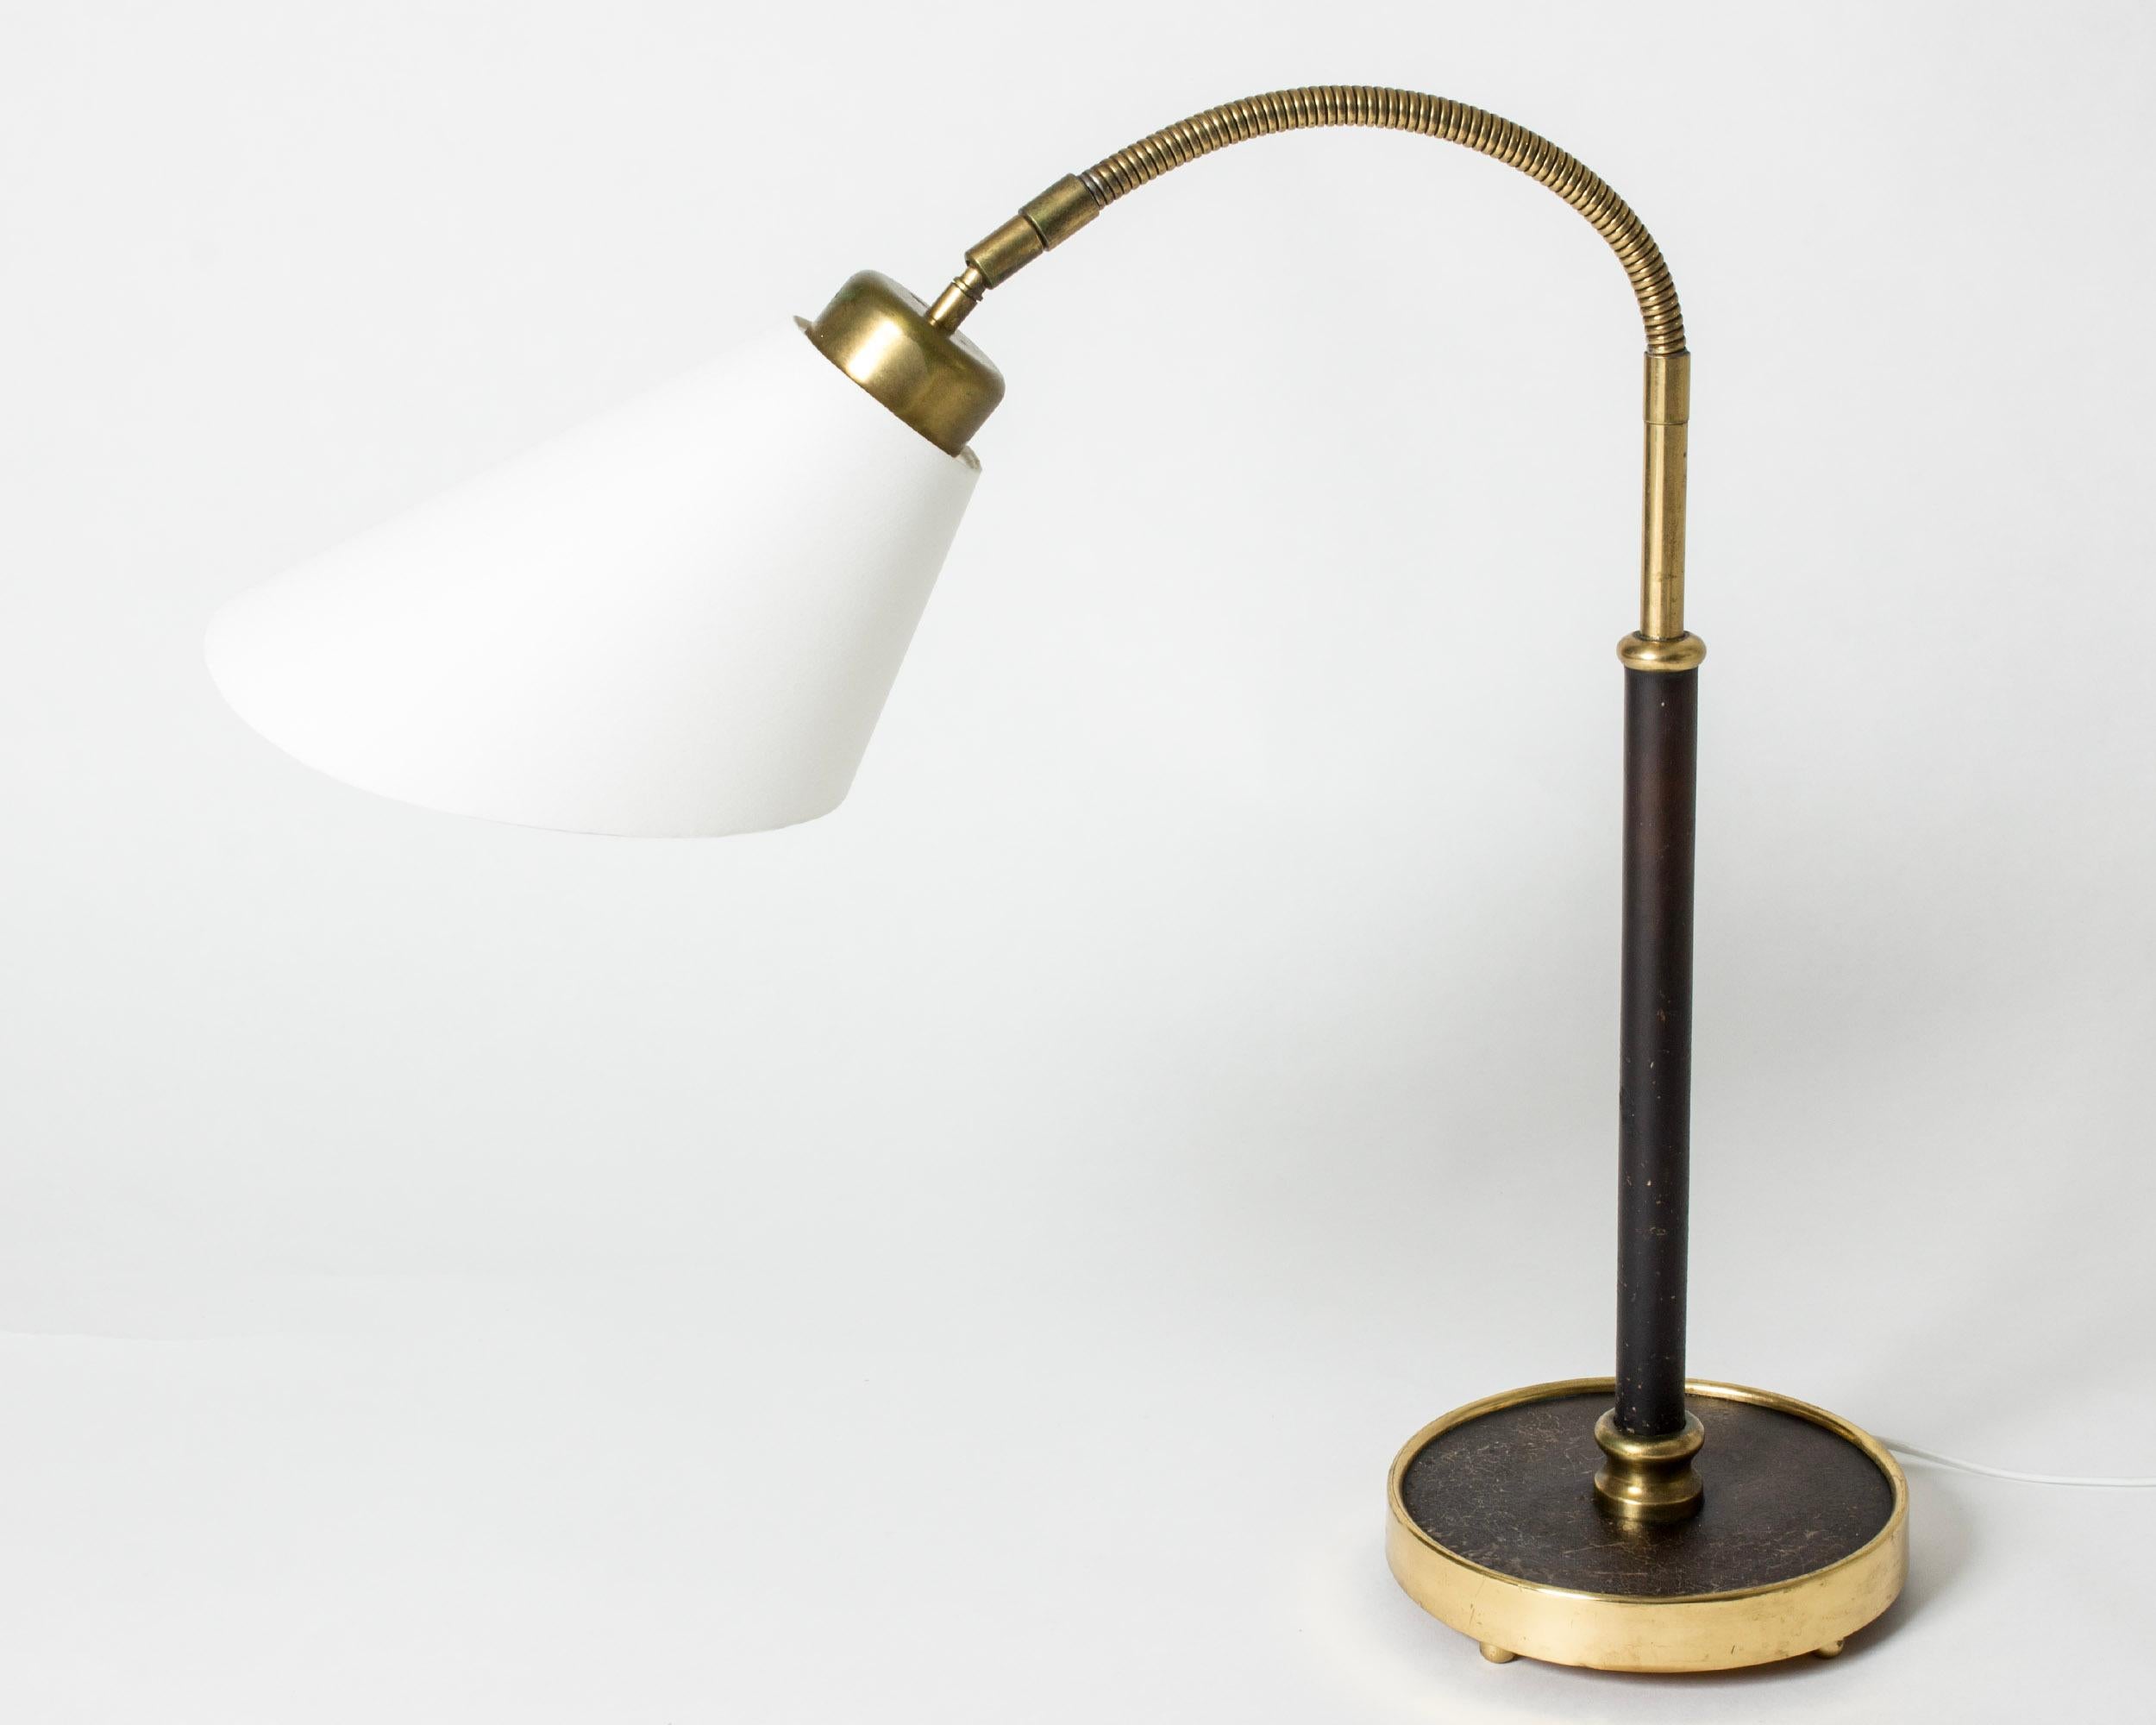 Rare, elegant brass table or desk lamp by Josef Frank, with original leather upholstery with some patina on the stem and base. Flexible neck and decorative round brass feet.